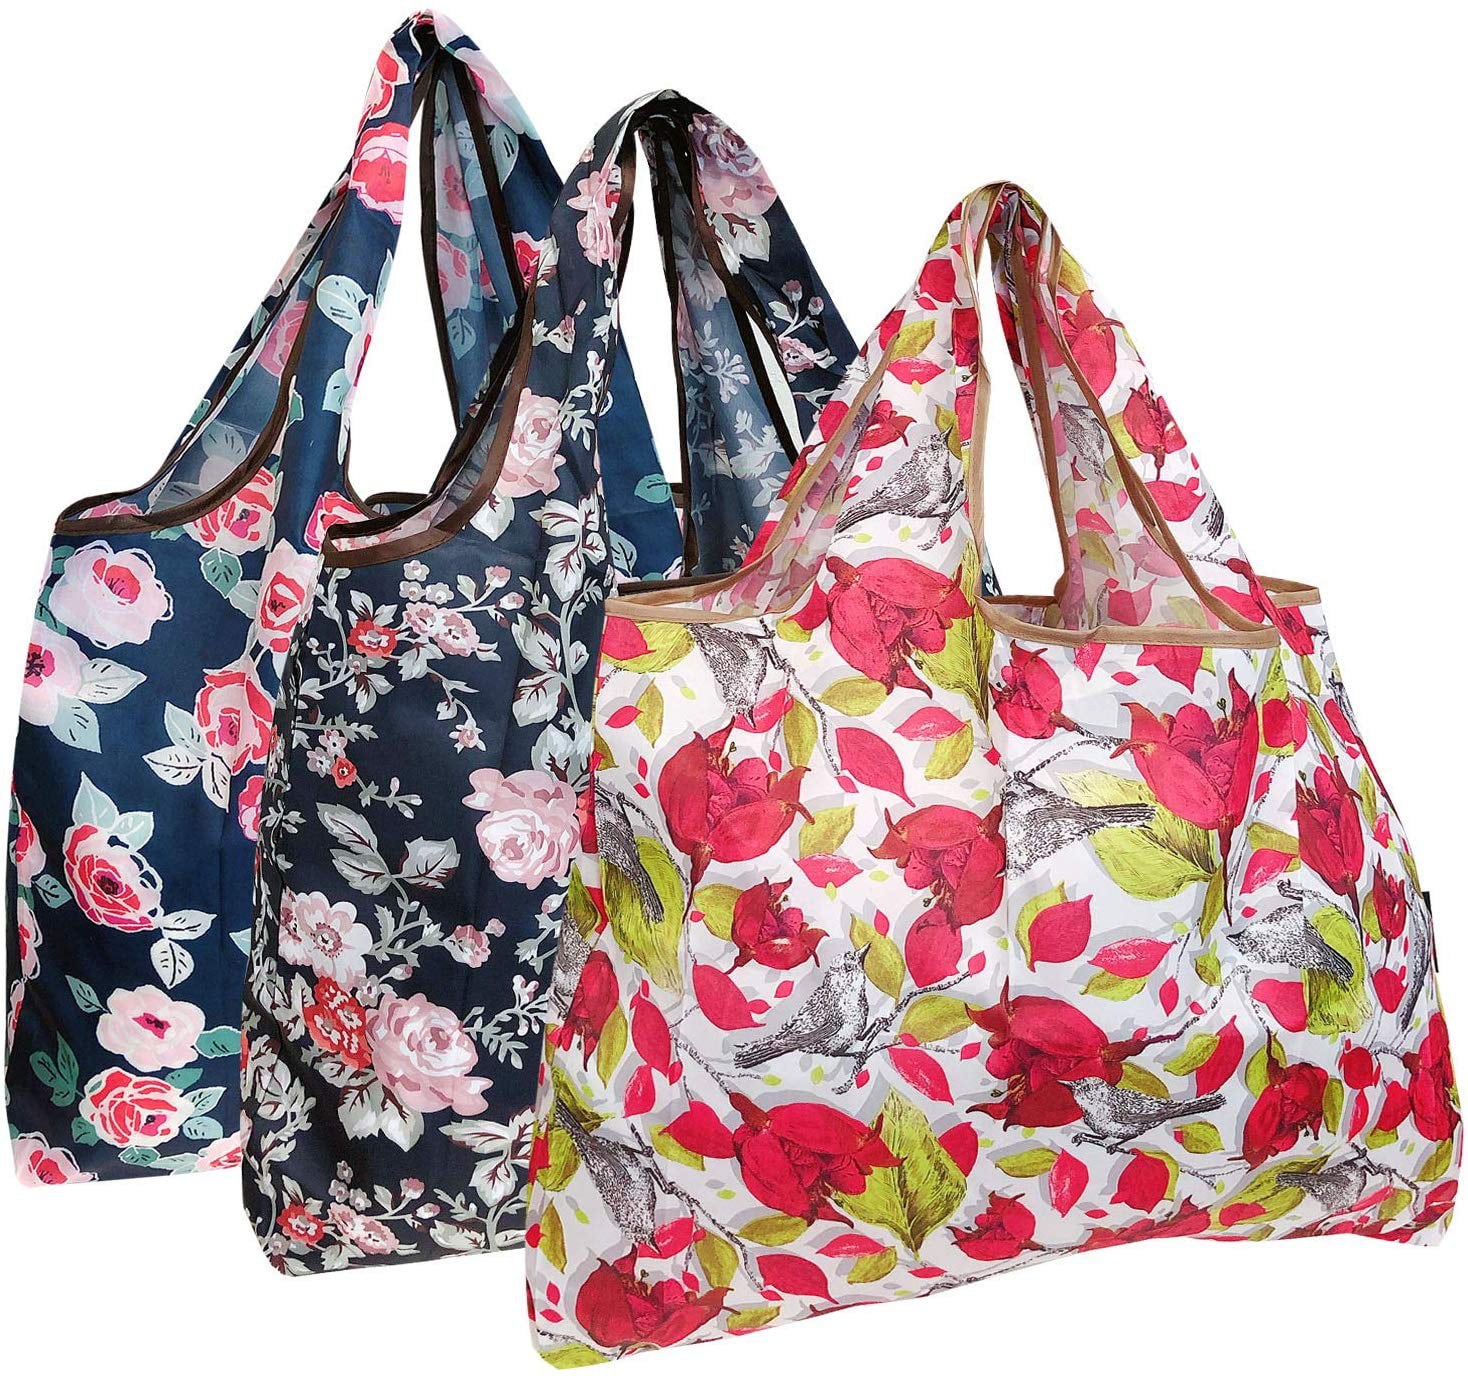 NymphFable 6 Pack Grocery Bags Reusable Peony Flowers Floral Butterfly Shopping Bags Washable Foldable Large Tote Bag